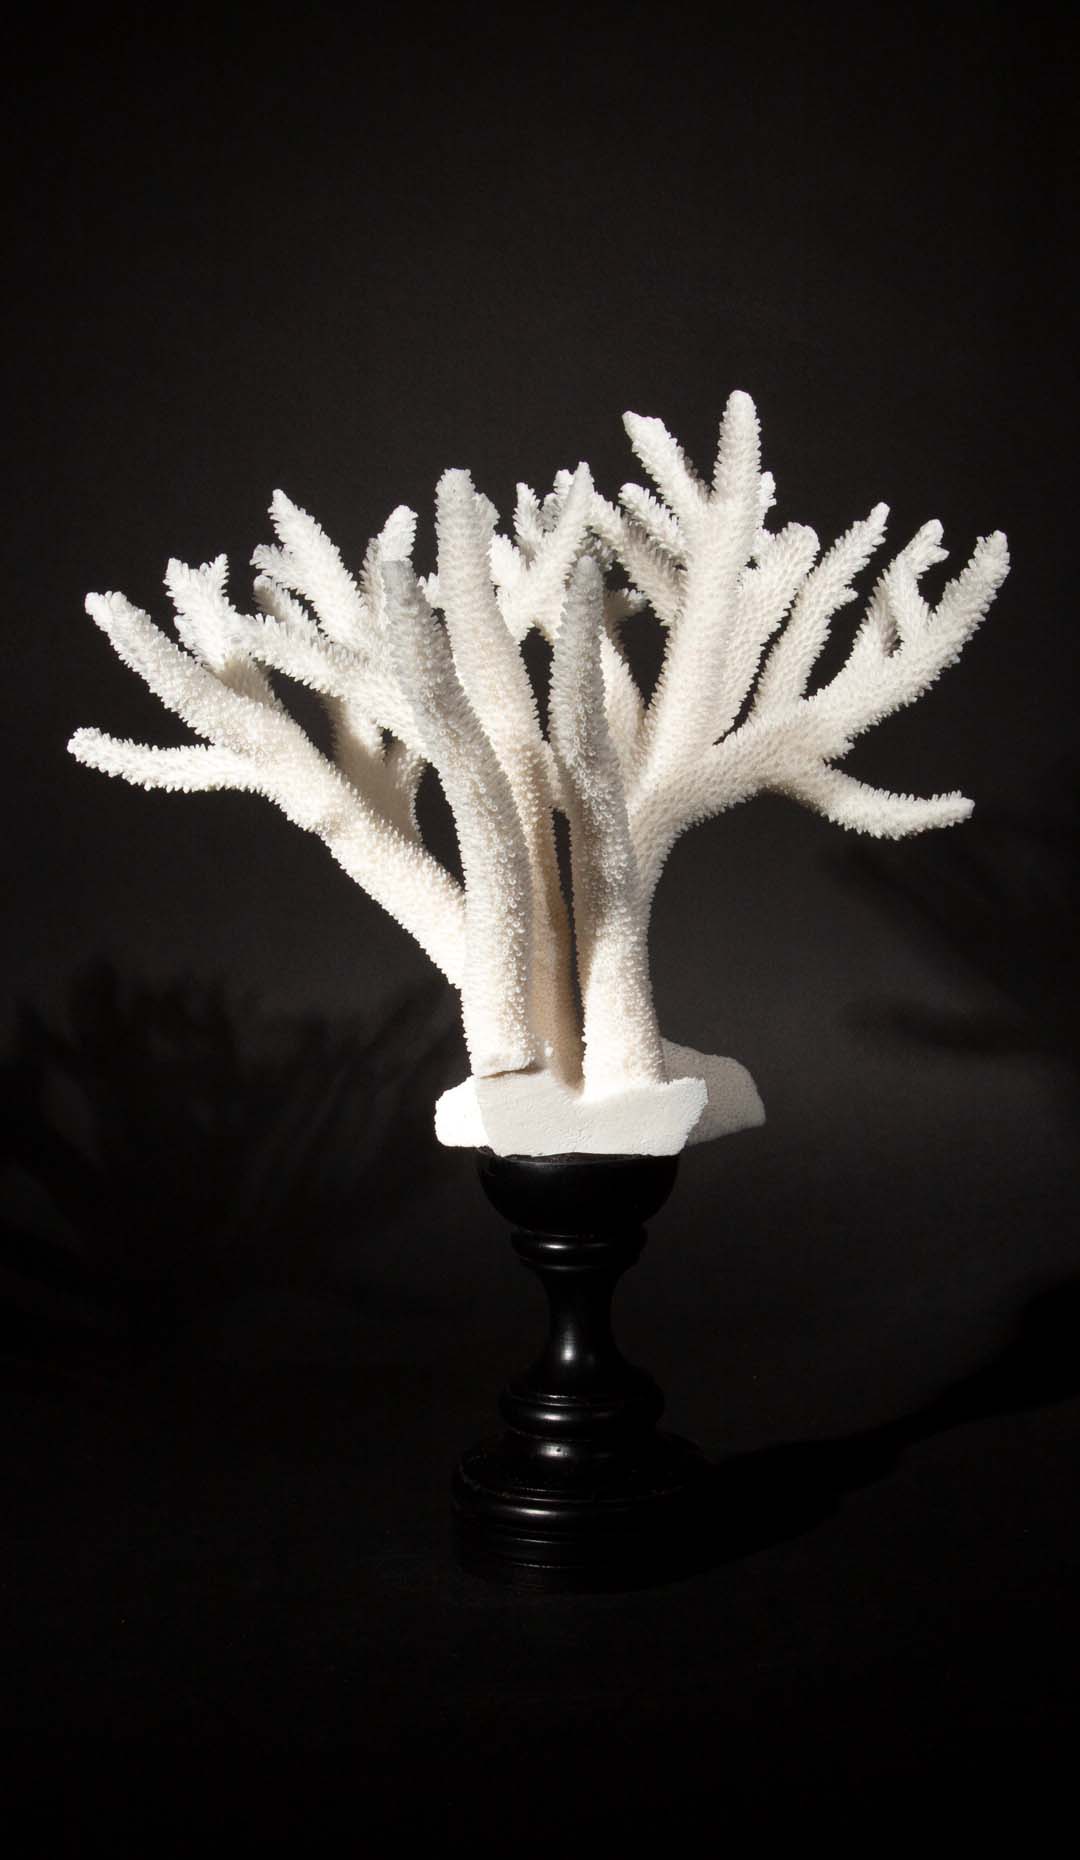 Stag Horn Coral